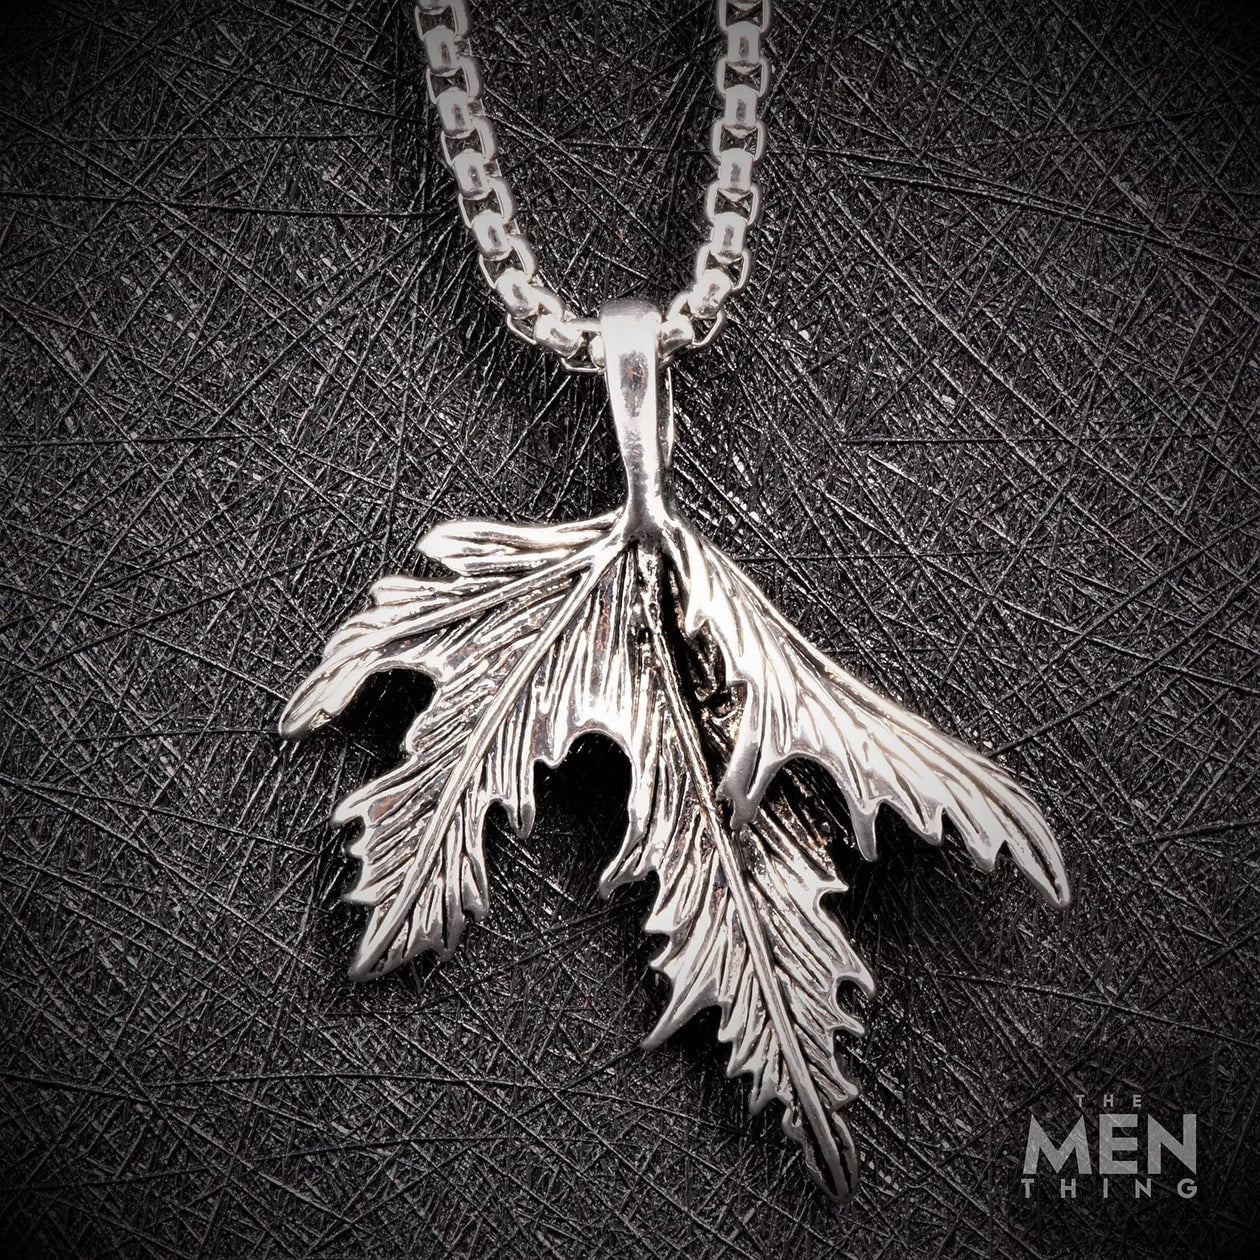 Folded-Leaf -Alloy Leaf Pendant With Pure Stainless Steel 24Inch Round Box Chain European Trending